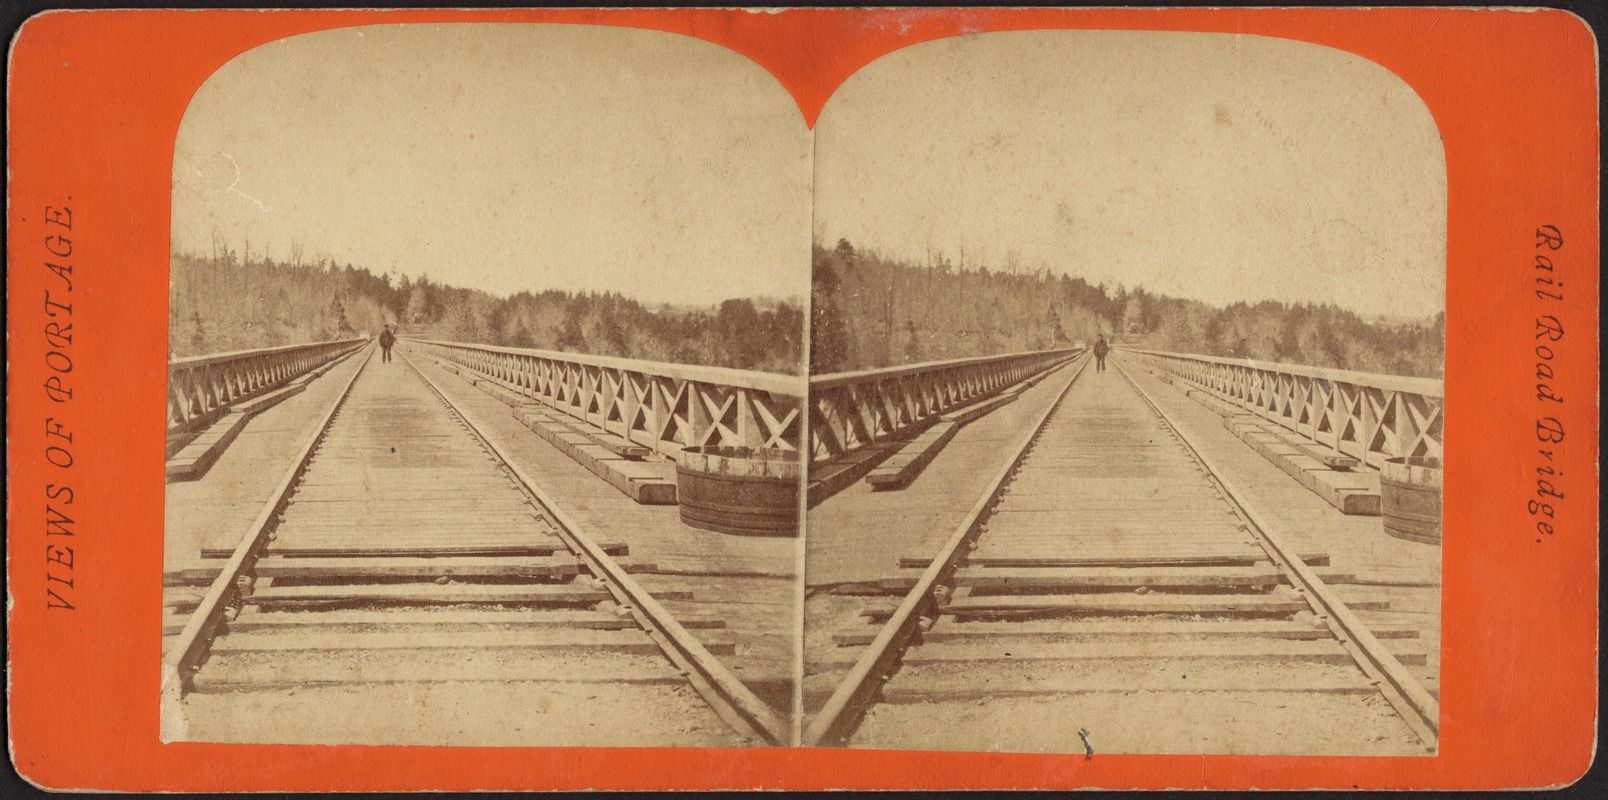 Railroad bridge, with a man standing on the tracks in the distance